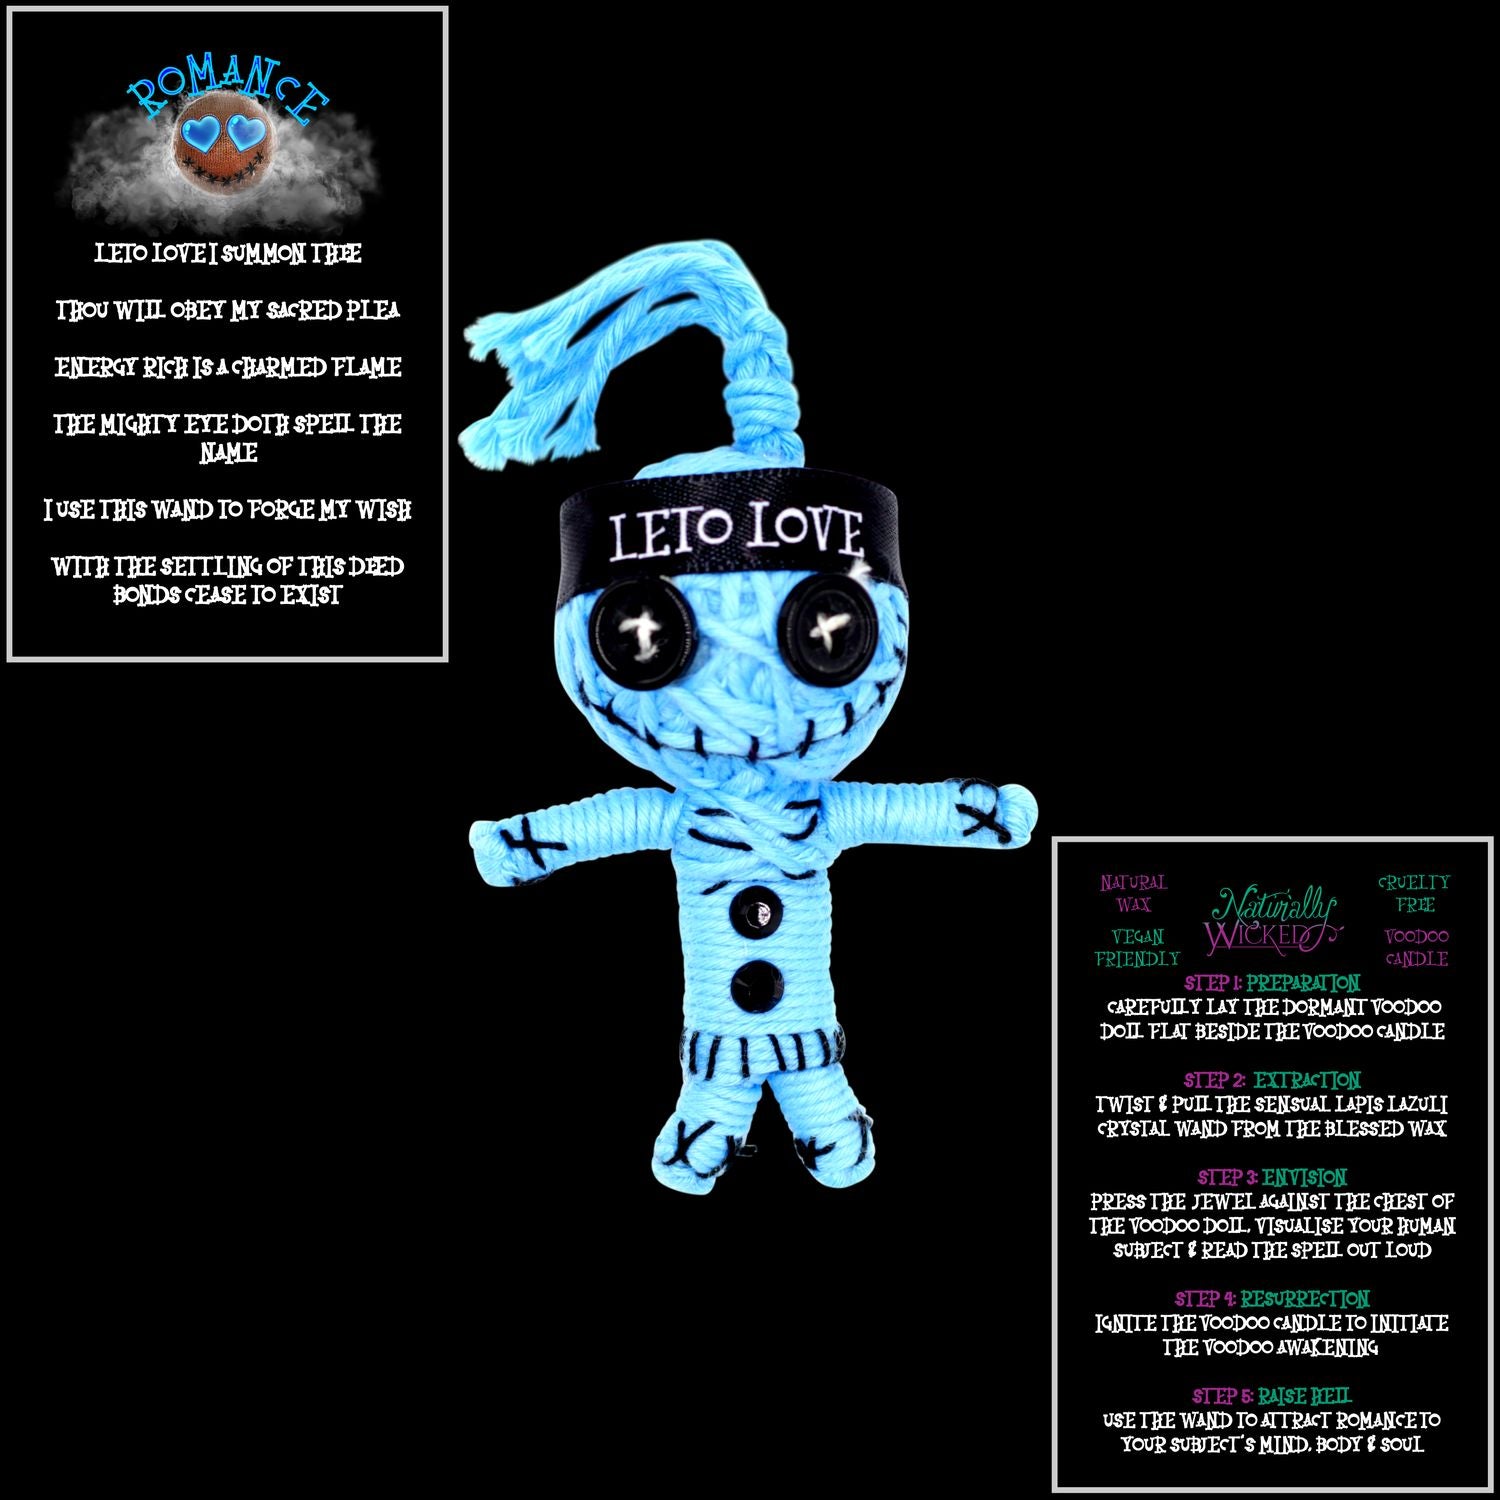 Naturally Wicked Blue Voodoo Doll Leto Love Featured With Romance Spell Cards. The Perfect Gift Of Romance.